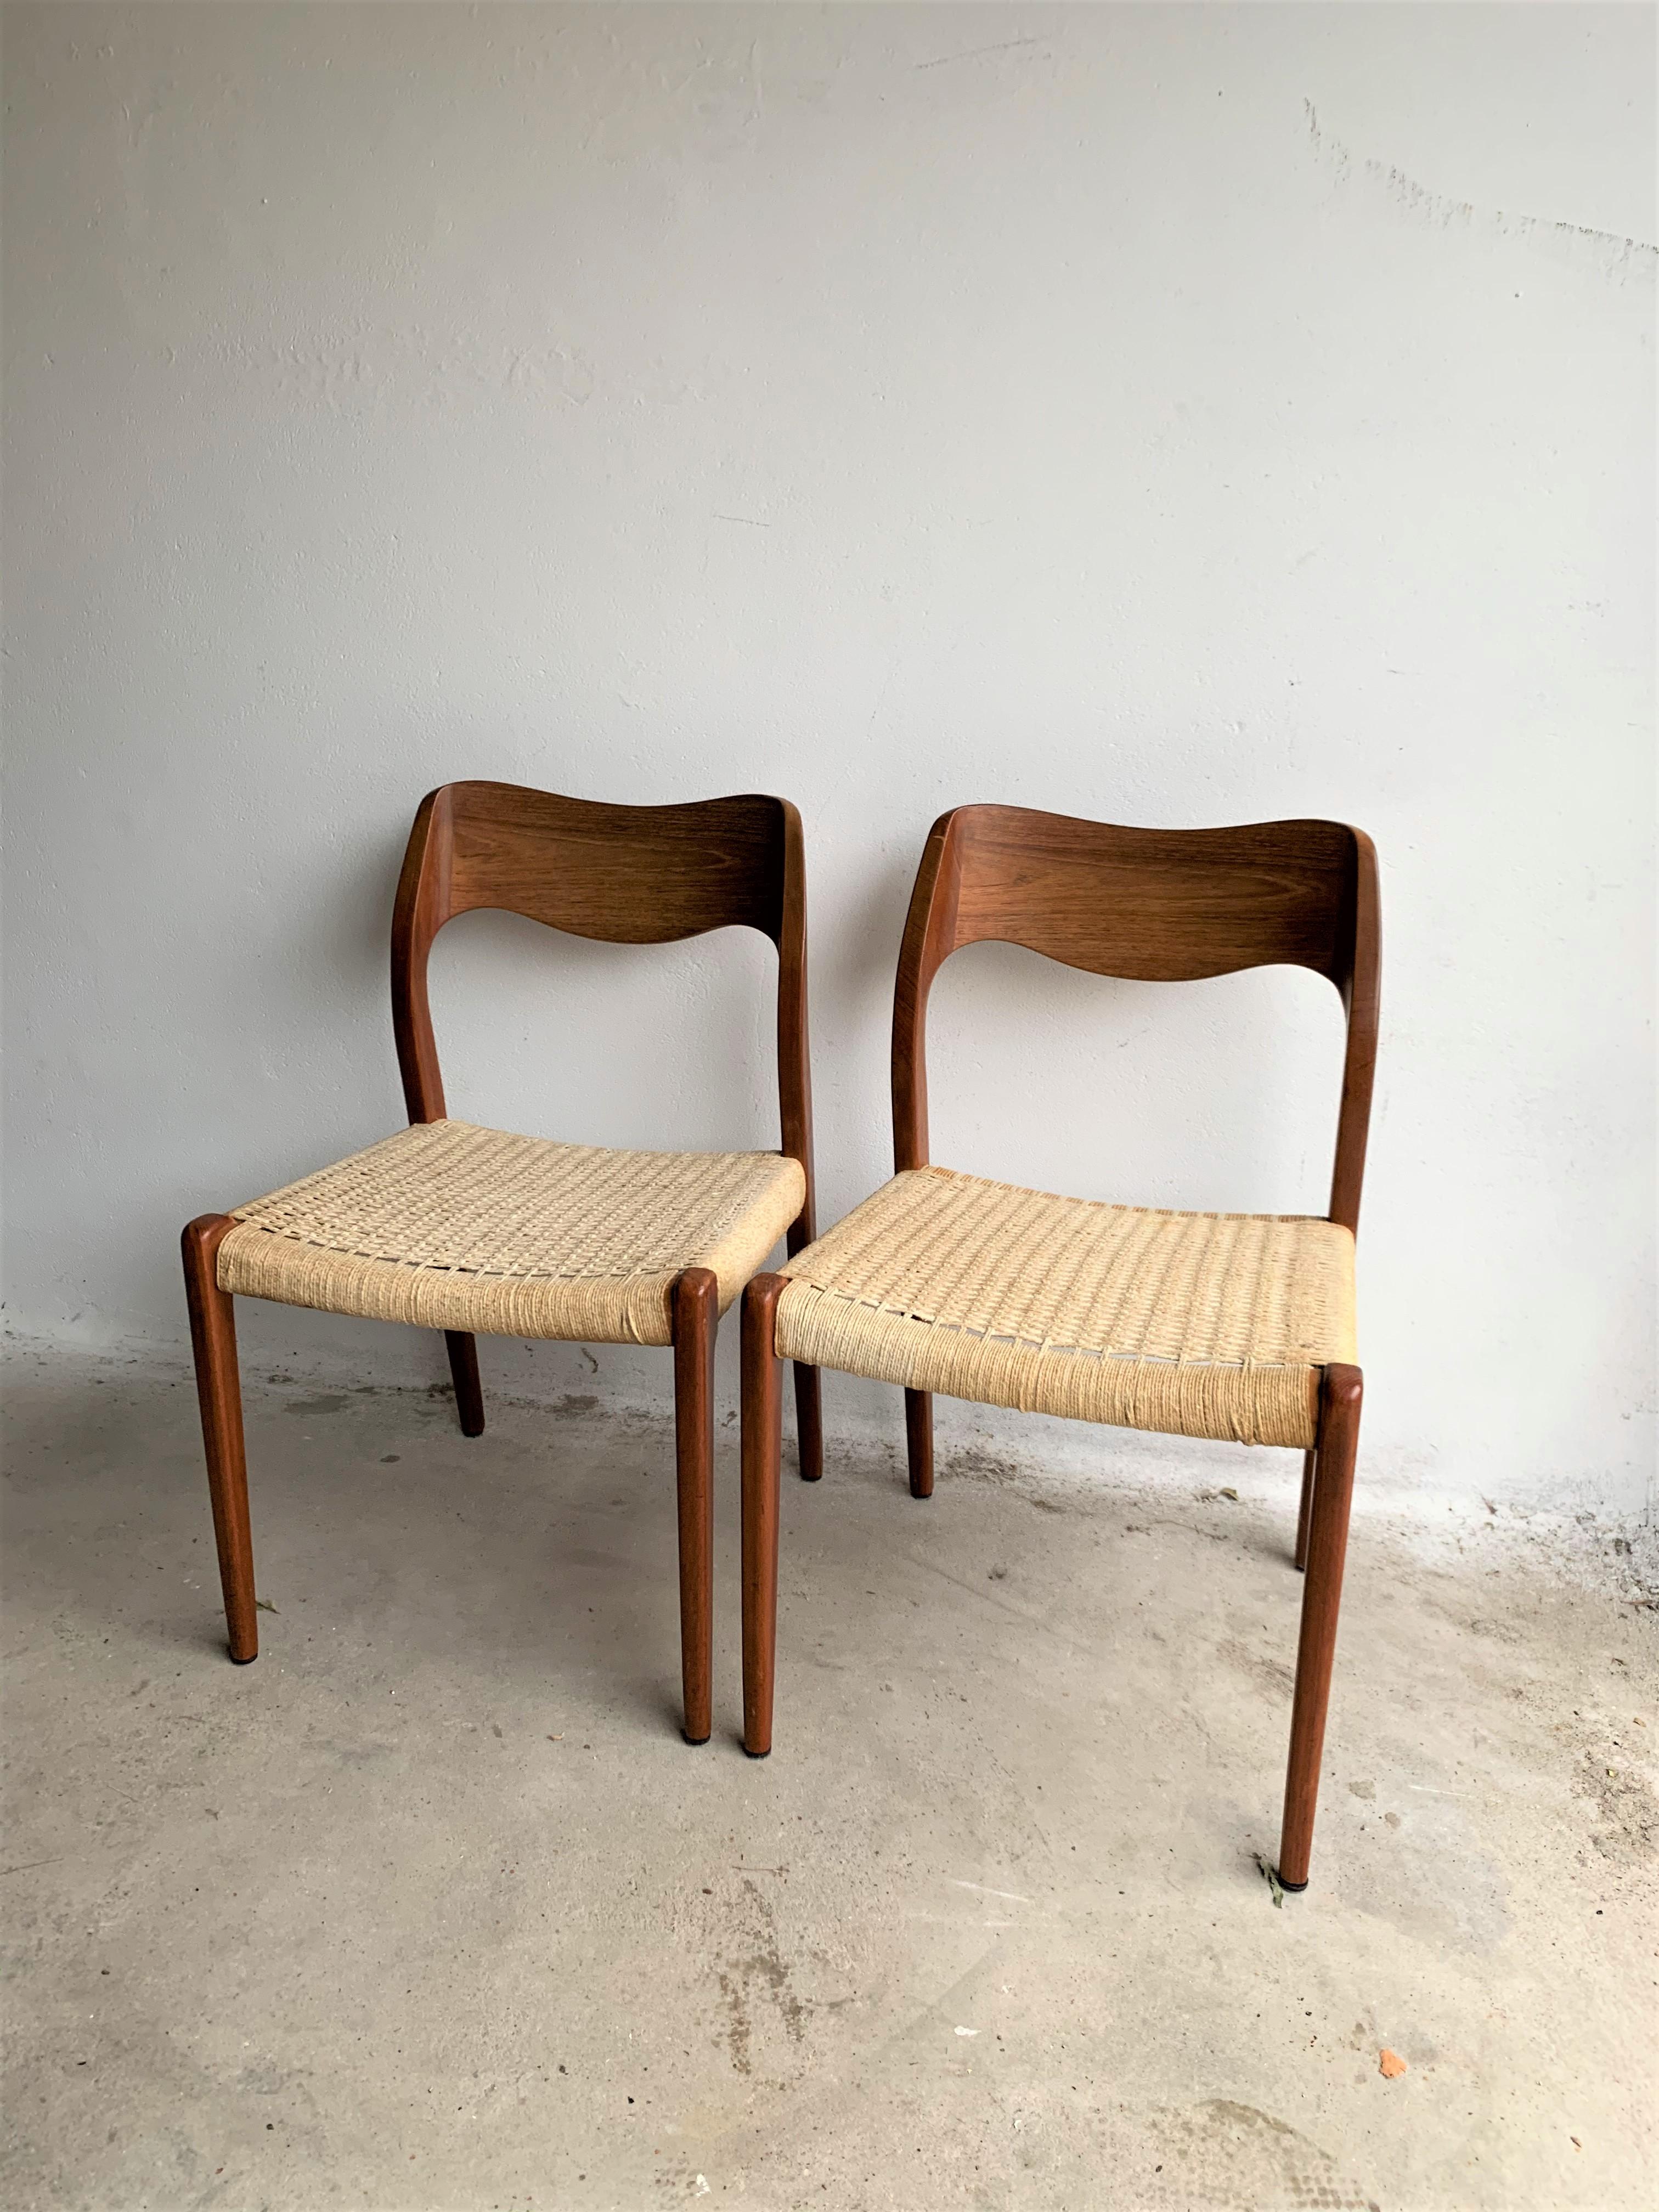 Mid-Century Modern dining chairs by Niels O. Møller for J.L. Møller Møbelfabrik in teak model no. 71, Denmark. Classic icon of Mid-Century Modern. Great quality teak frame, paper cord in good original vintage condition.